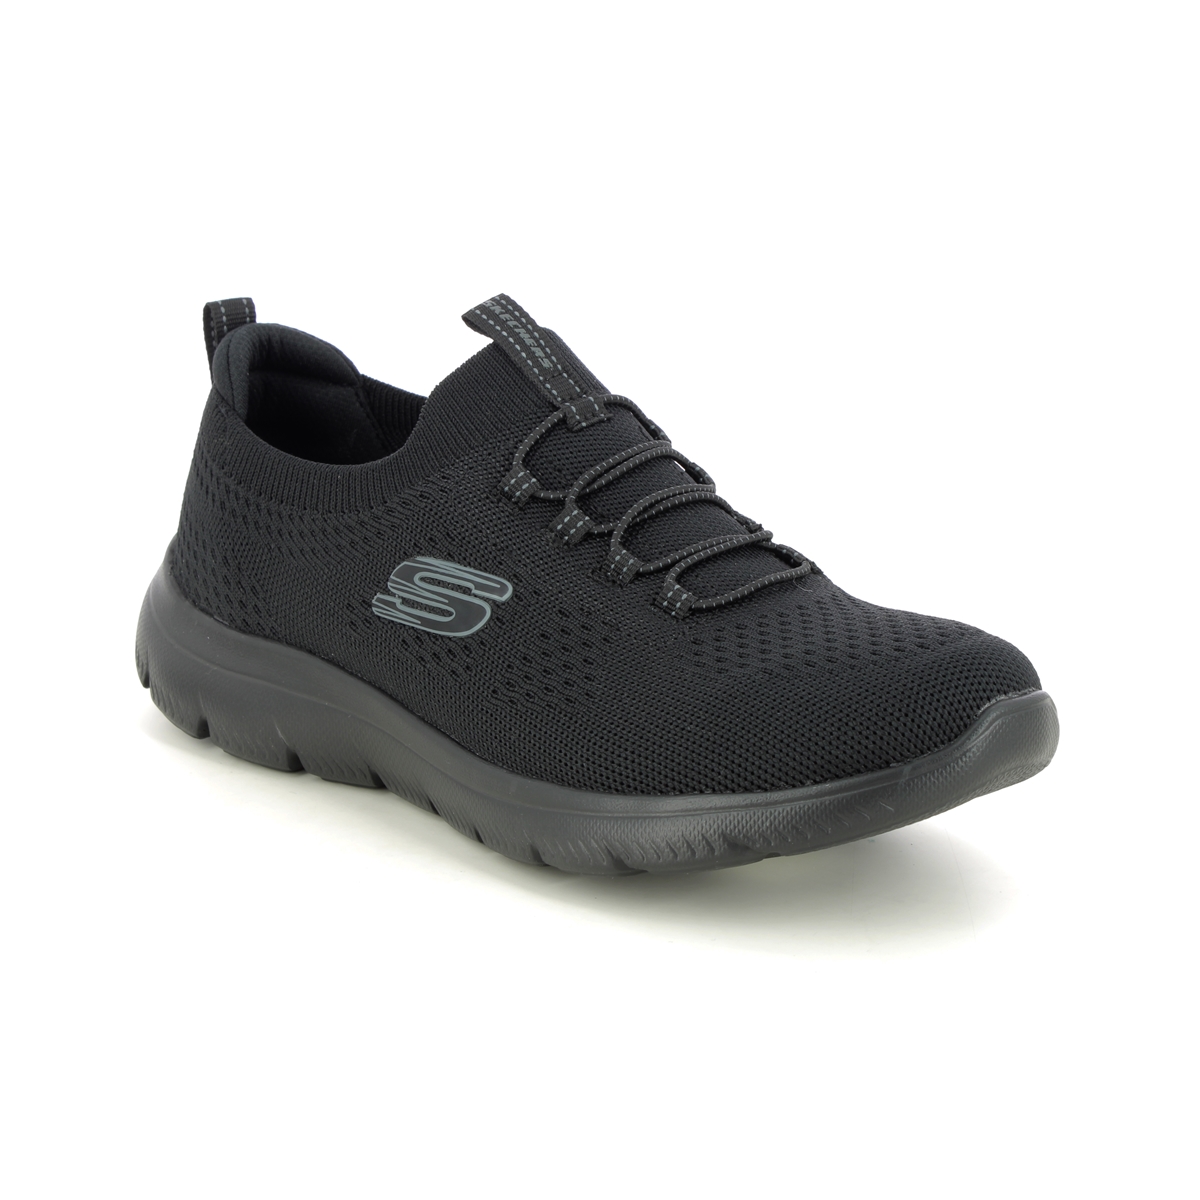 Skechers Summits Bungee BBK Black Womens trainers 150116 in a Plain Textile in Size 3